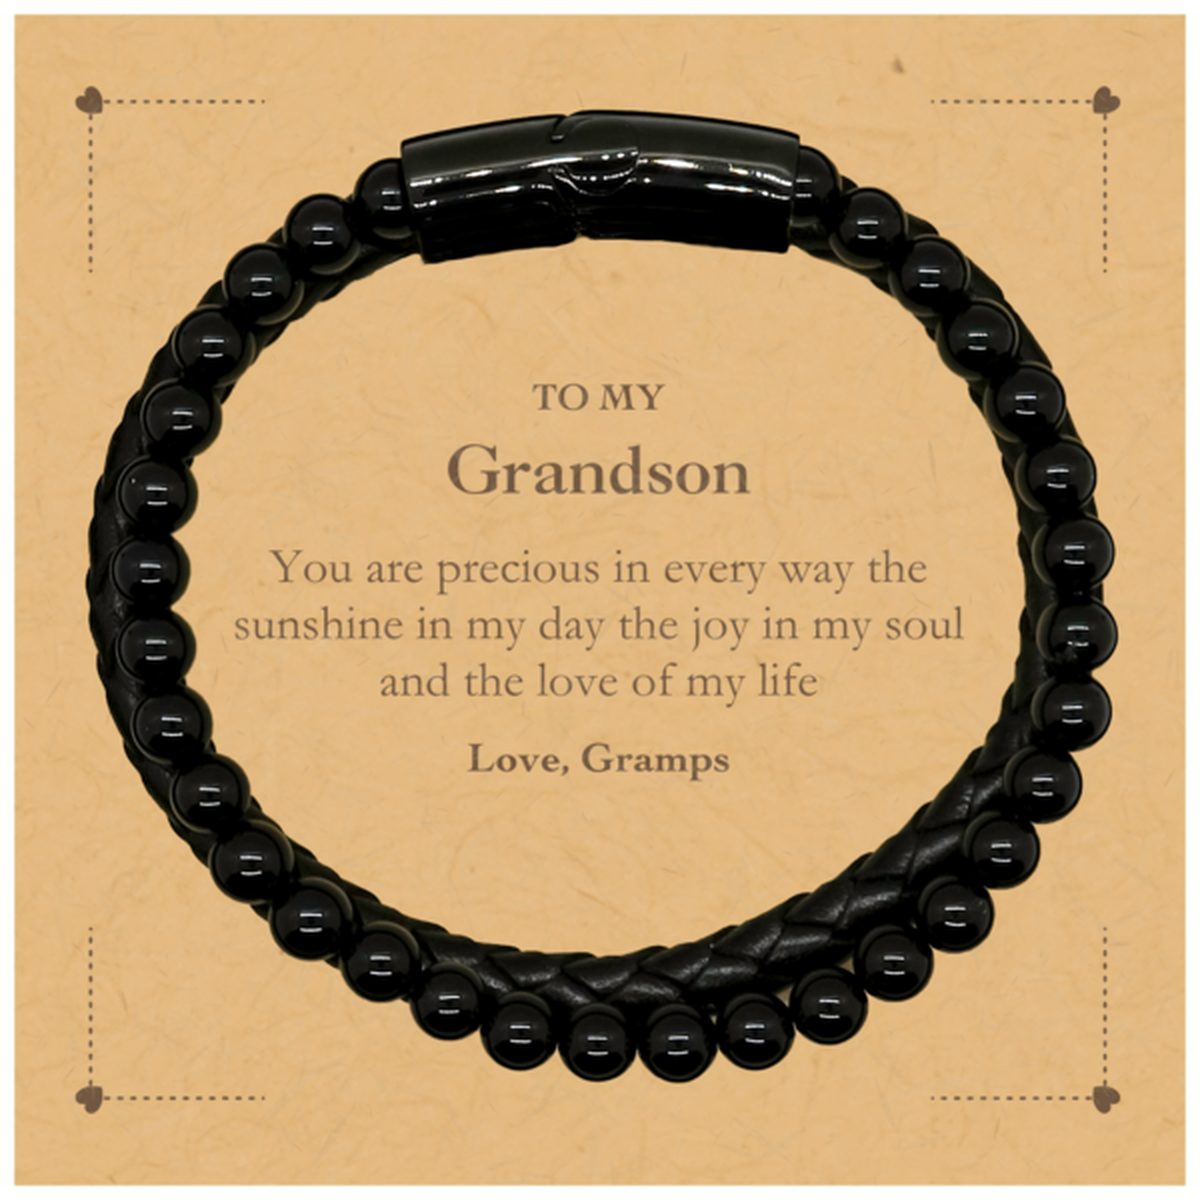 Graduation Gifts for Grandson Stone Leather Bracelets Present from Gramps, Christmas Grandson Birthday Gifts Grandson You are precious in every way the sunshine in my day. Love, Gramps